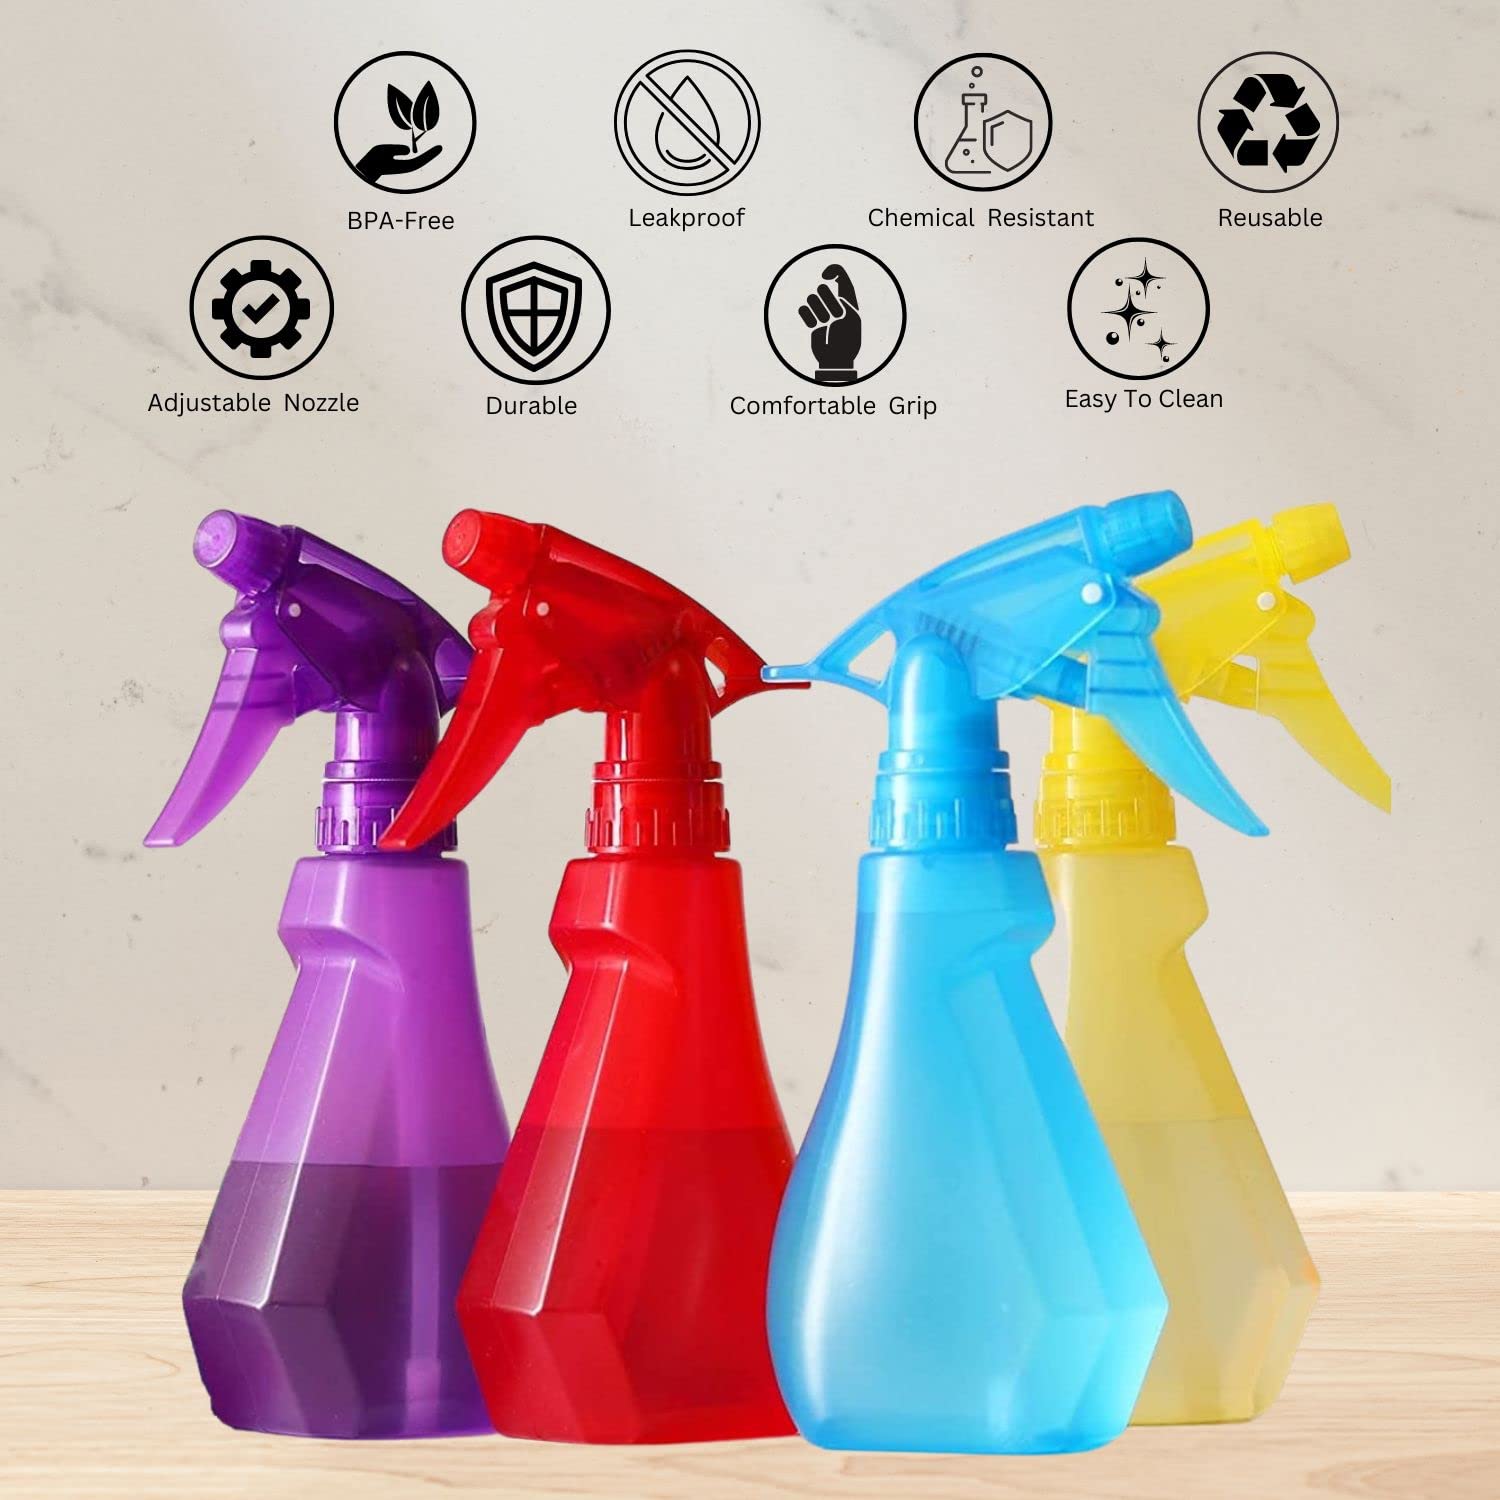 DilaBee Spray Bottles (4-Pack, 8 Oz) Water Spray Bottle for Hair, Plants, Cleaning Solutions, Cooking, BBQ, Squirt Bottle for Cats, Empty Spray Bottles - BPA-Free - Multicolor